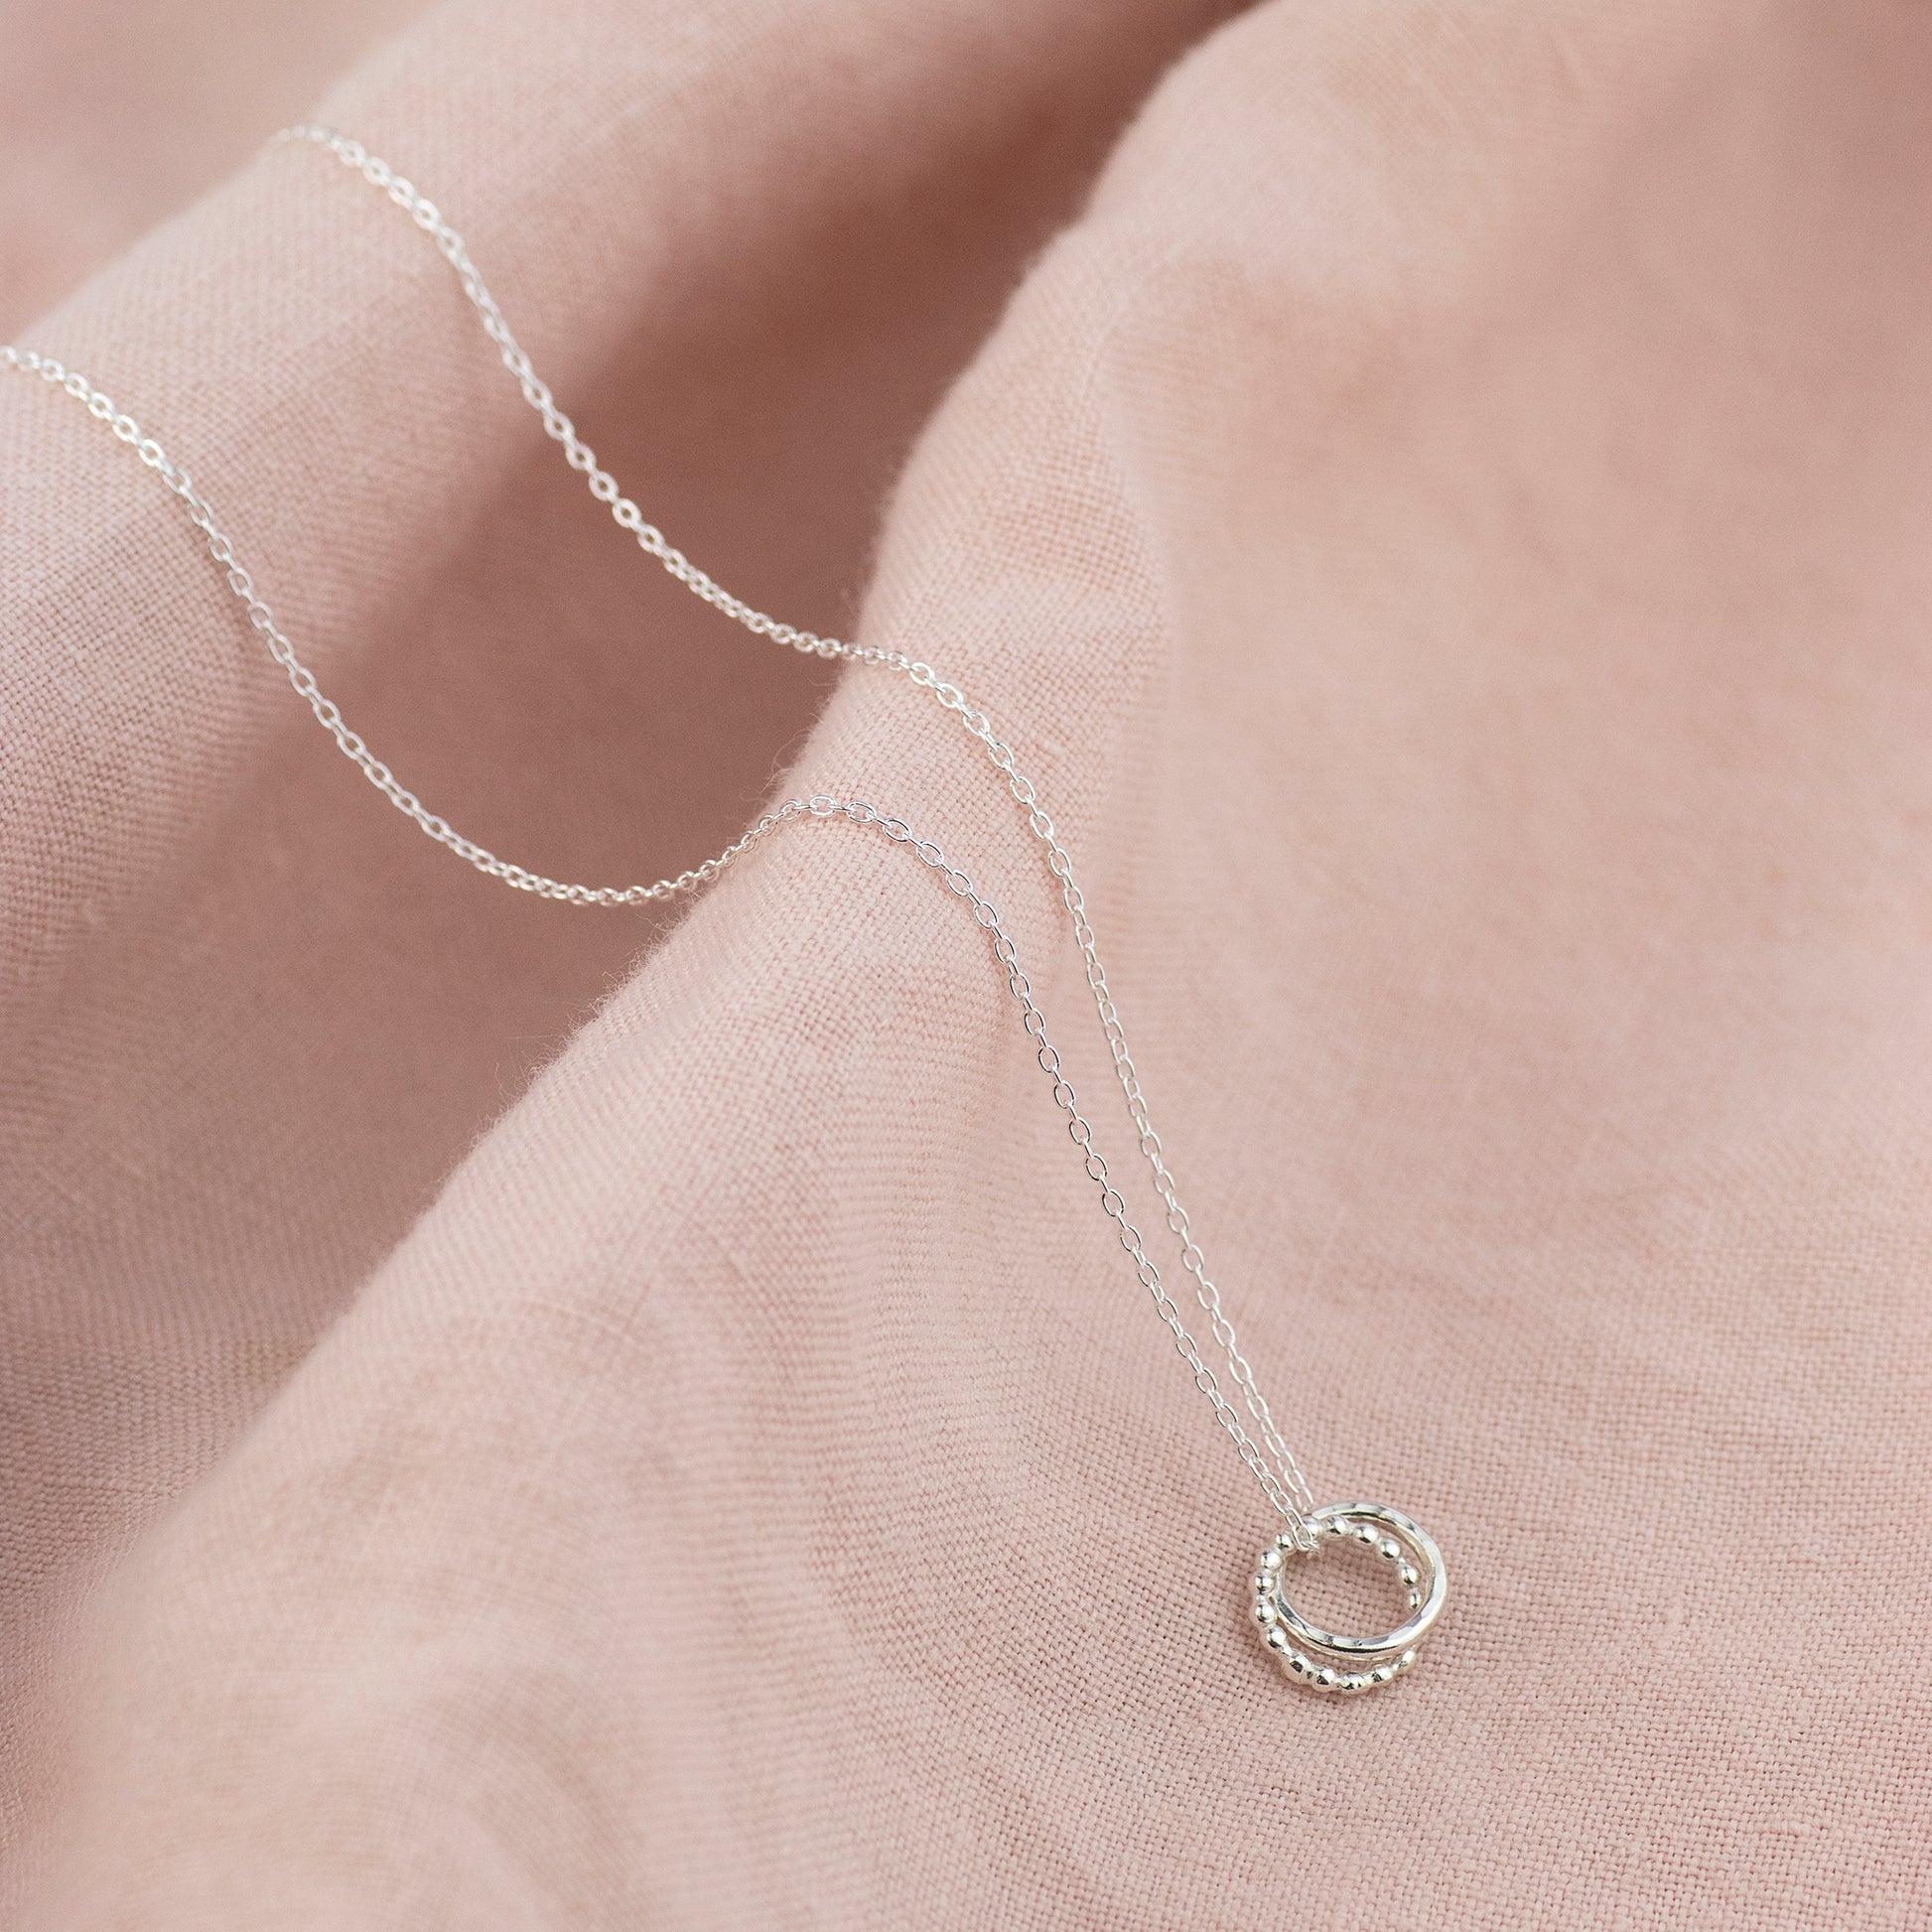 Gift for Bride from Sister - Silver Love Knot Necklace